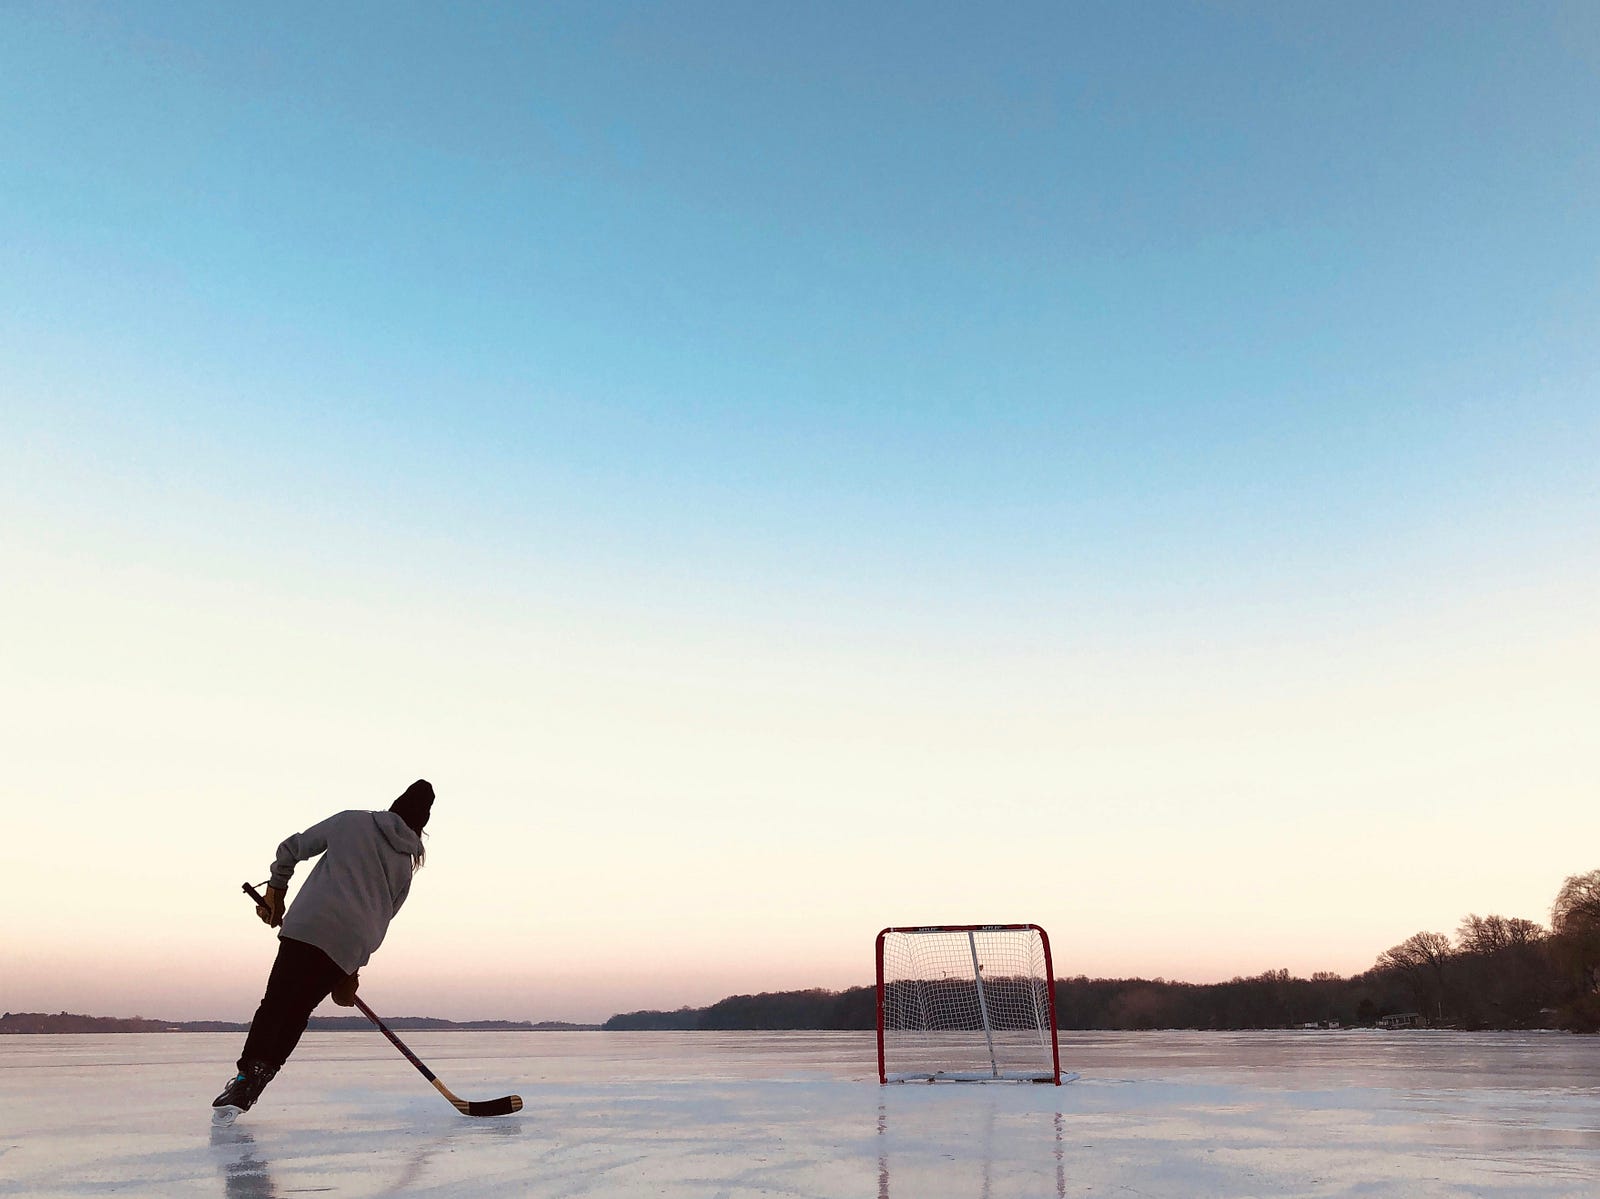 A person skates away from us on an outdoor frozen lake, hockey stick in hand. There is a net in the background.